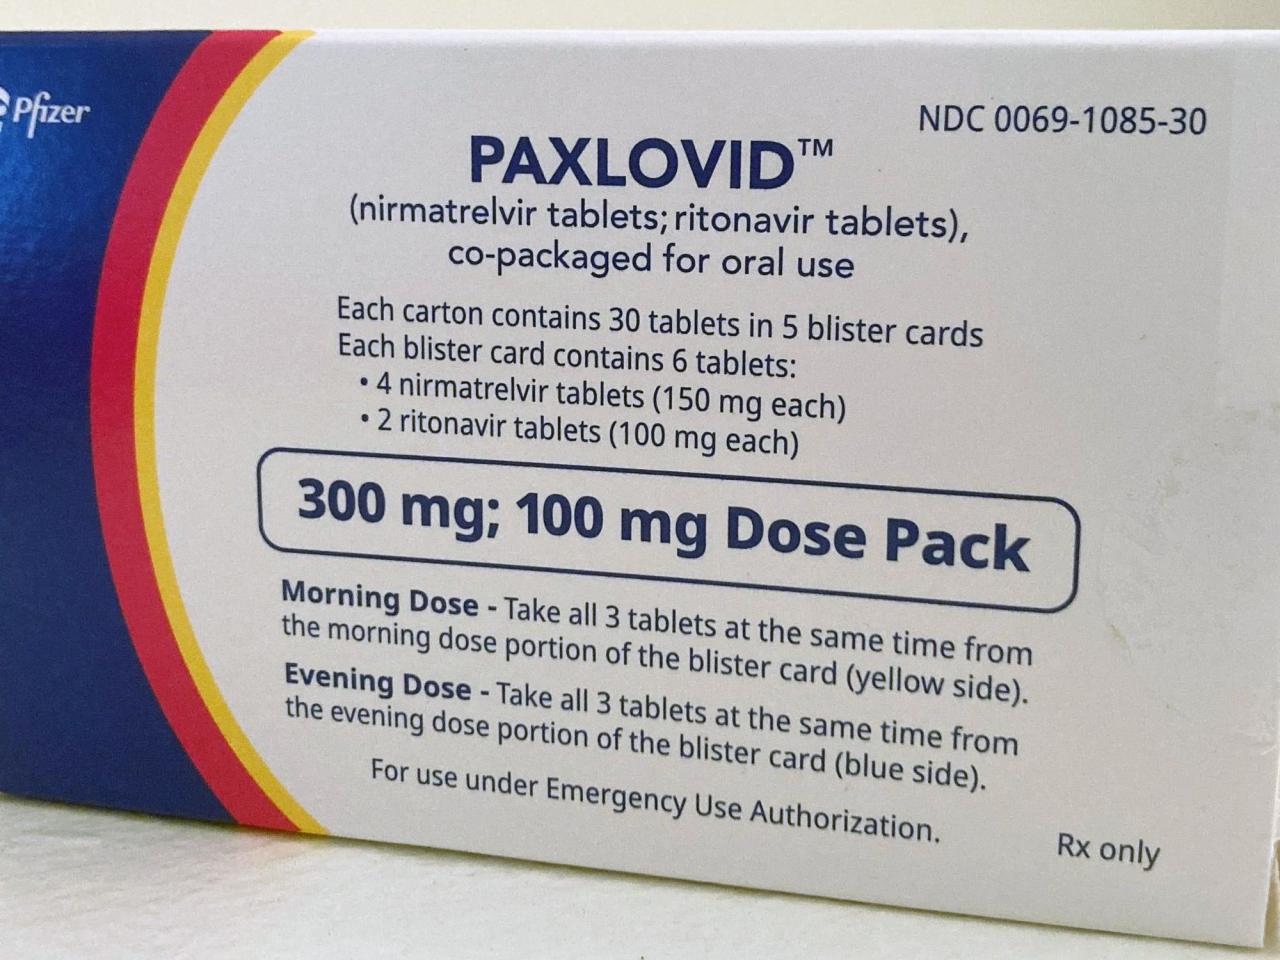 How can one obtain COVID-19 antiviral medication such as Paxlovid?